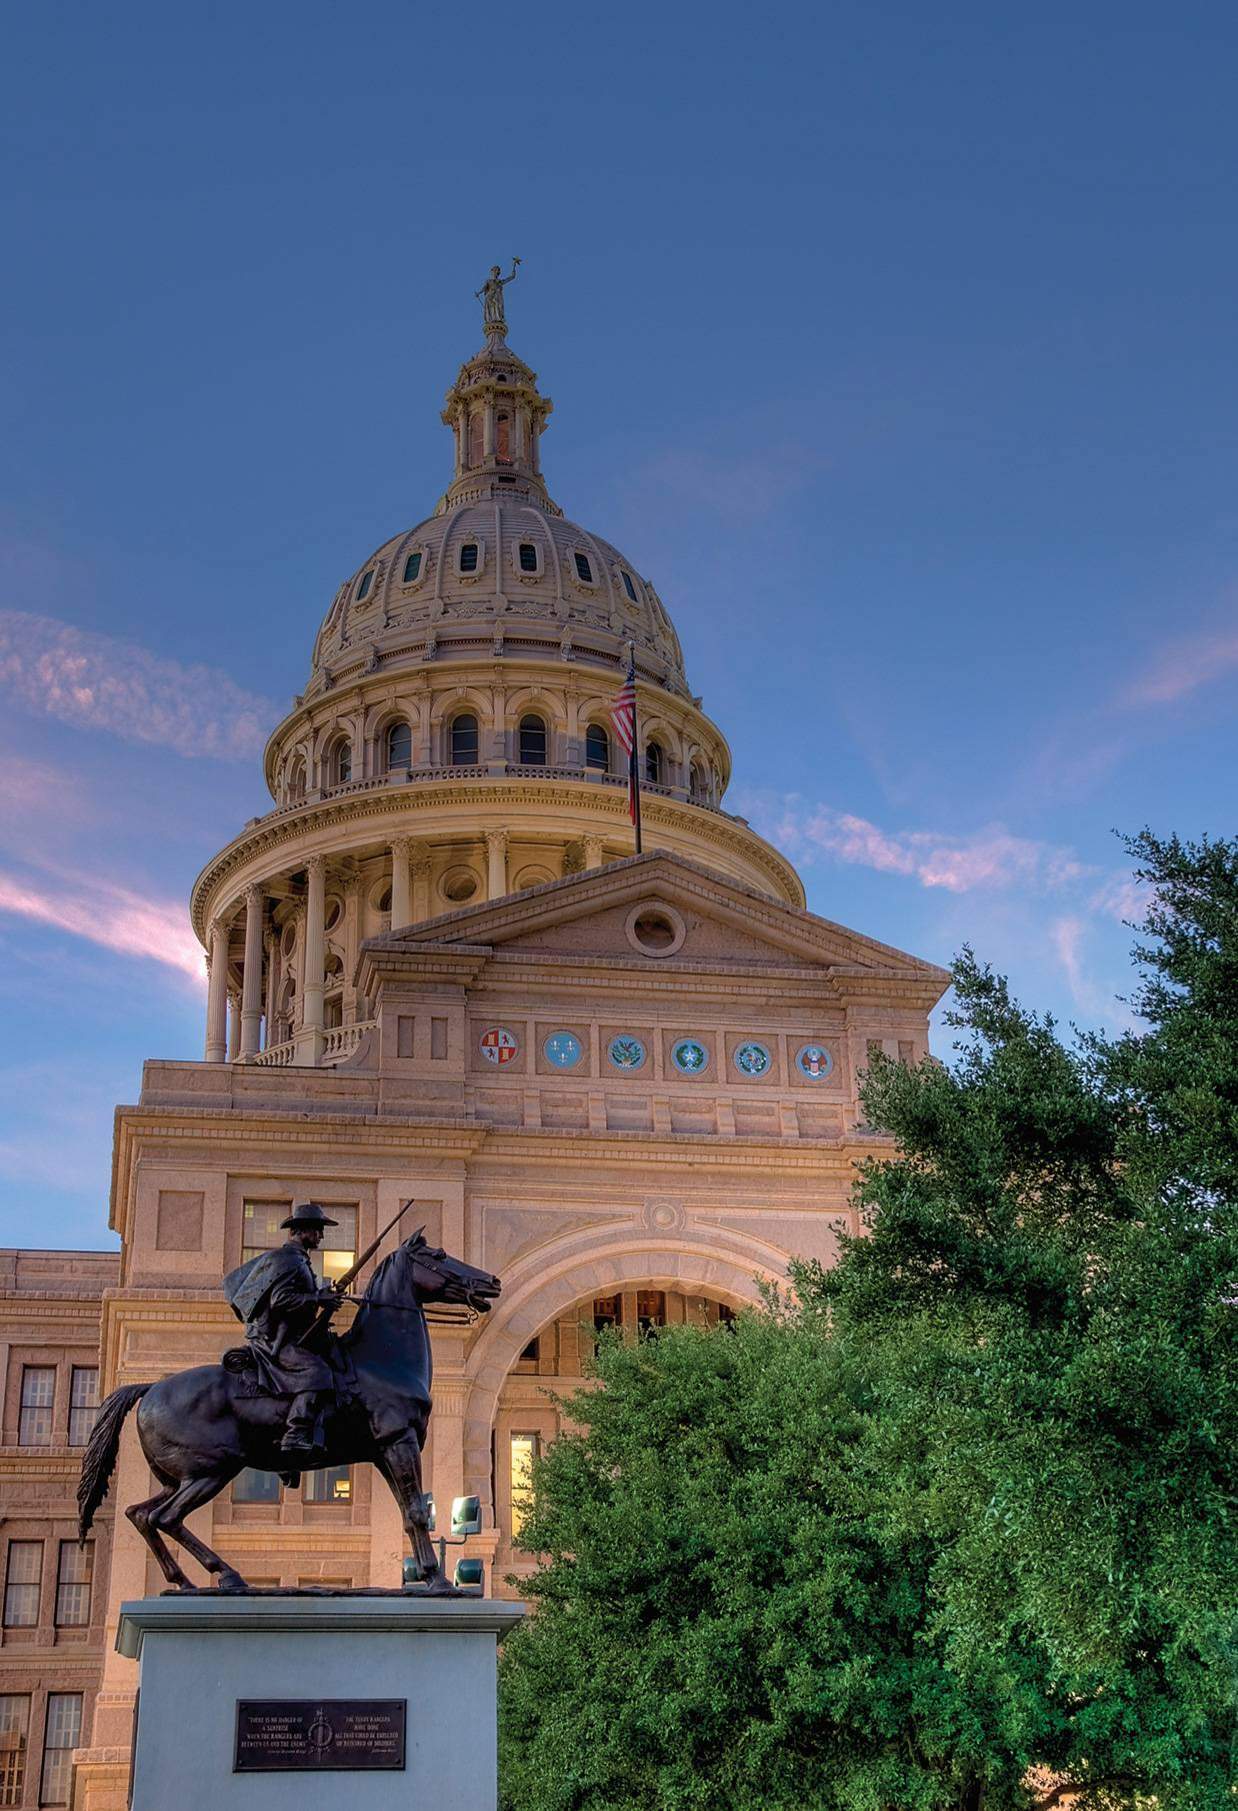 outside the texas capital with a statue of a horse